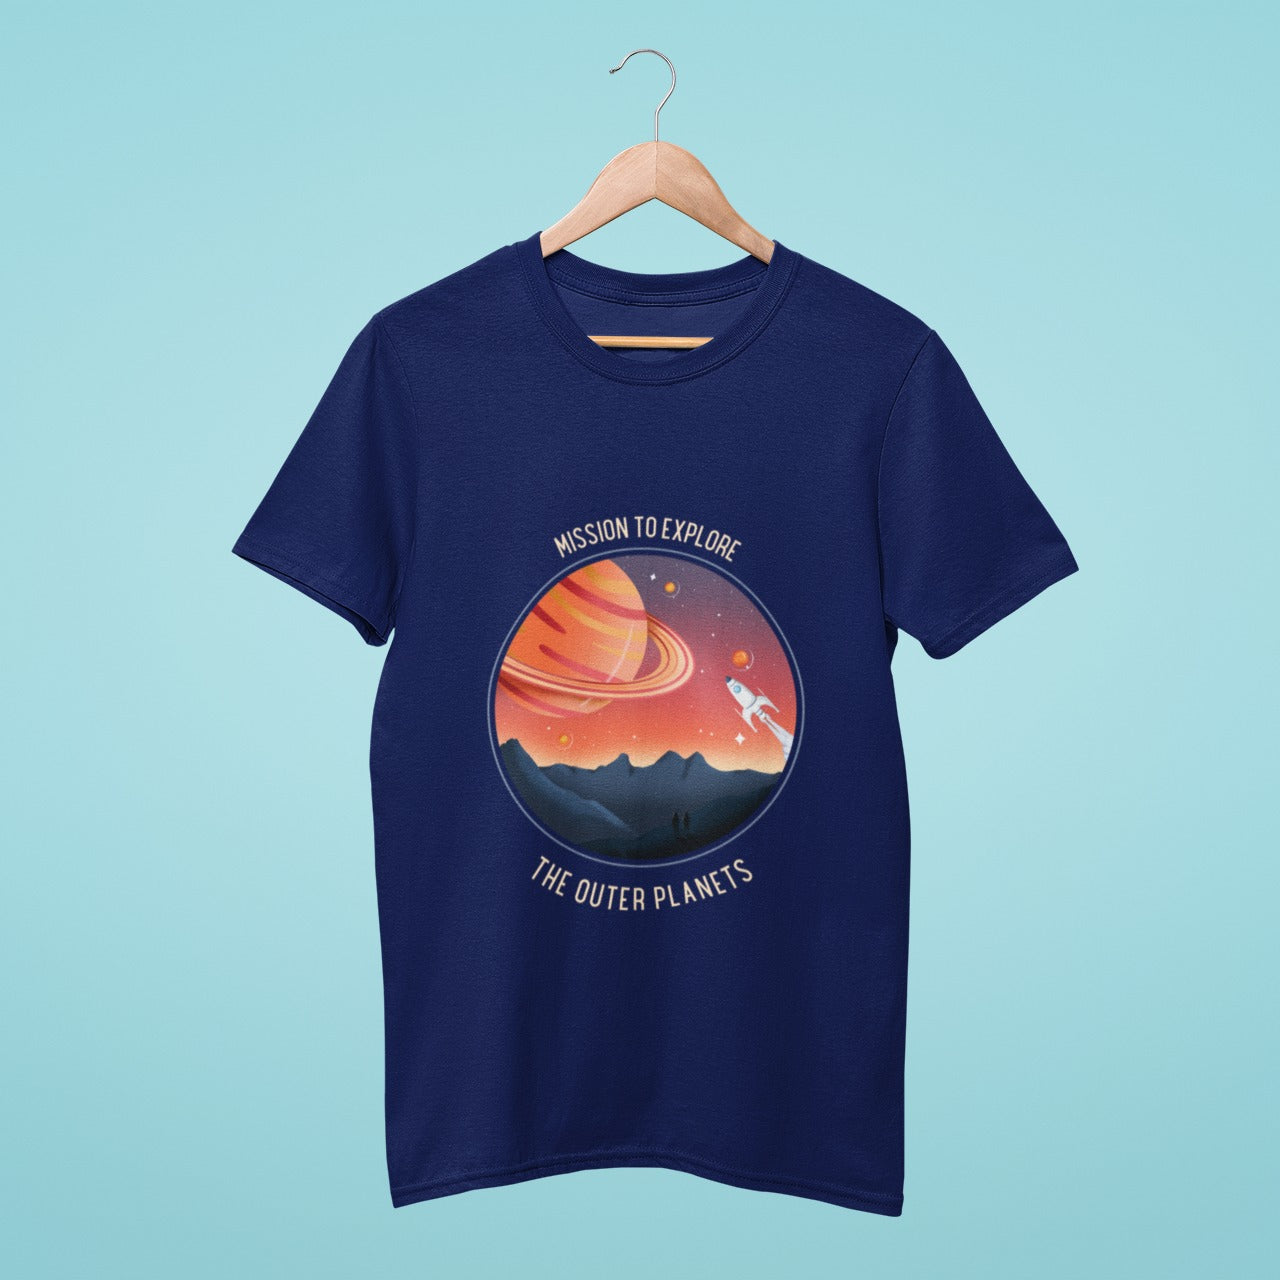 Get ready for an interstellar journey with this navy blue t-shirt featuring a rocket and planets. The slogan "Mission to Explore the Outer Planets" boldly proclaims your love for space exploration. Wear it to show your passion for the cosmos and inspire others to dream big.